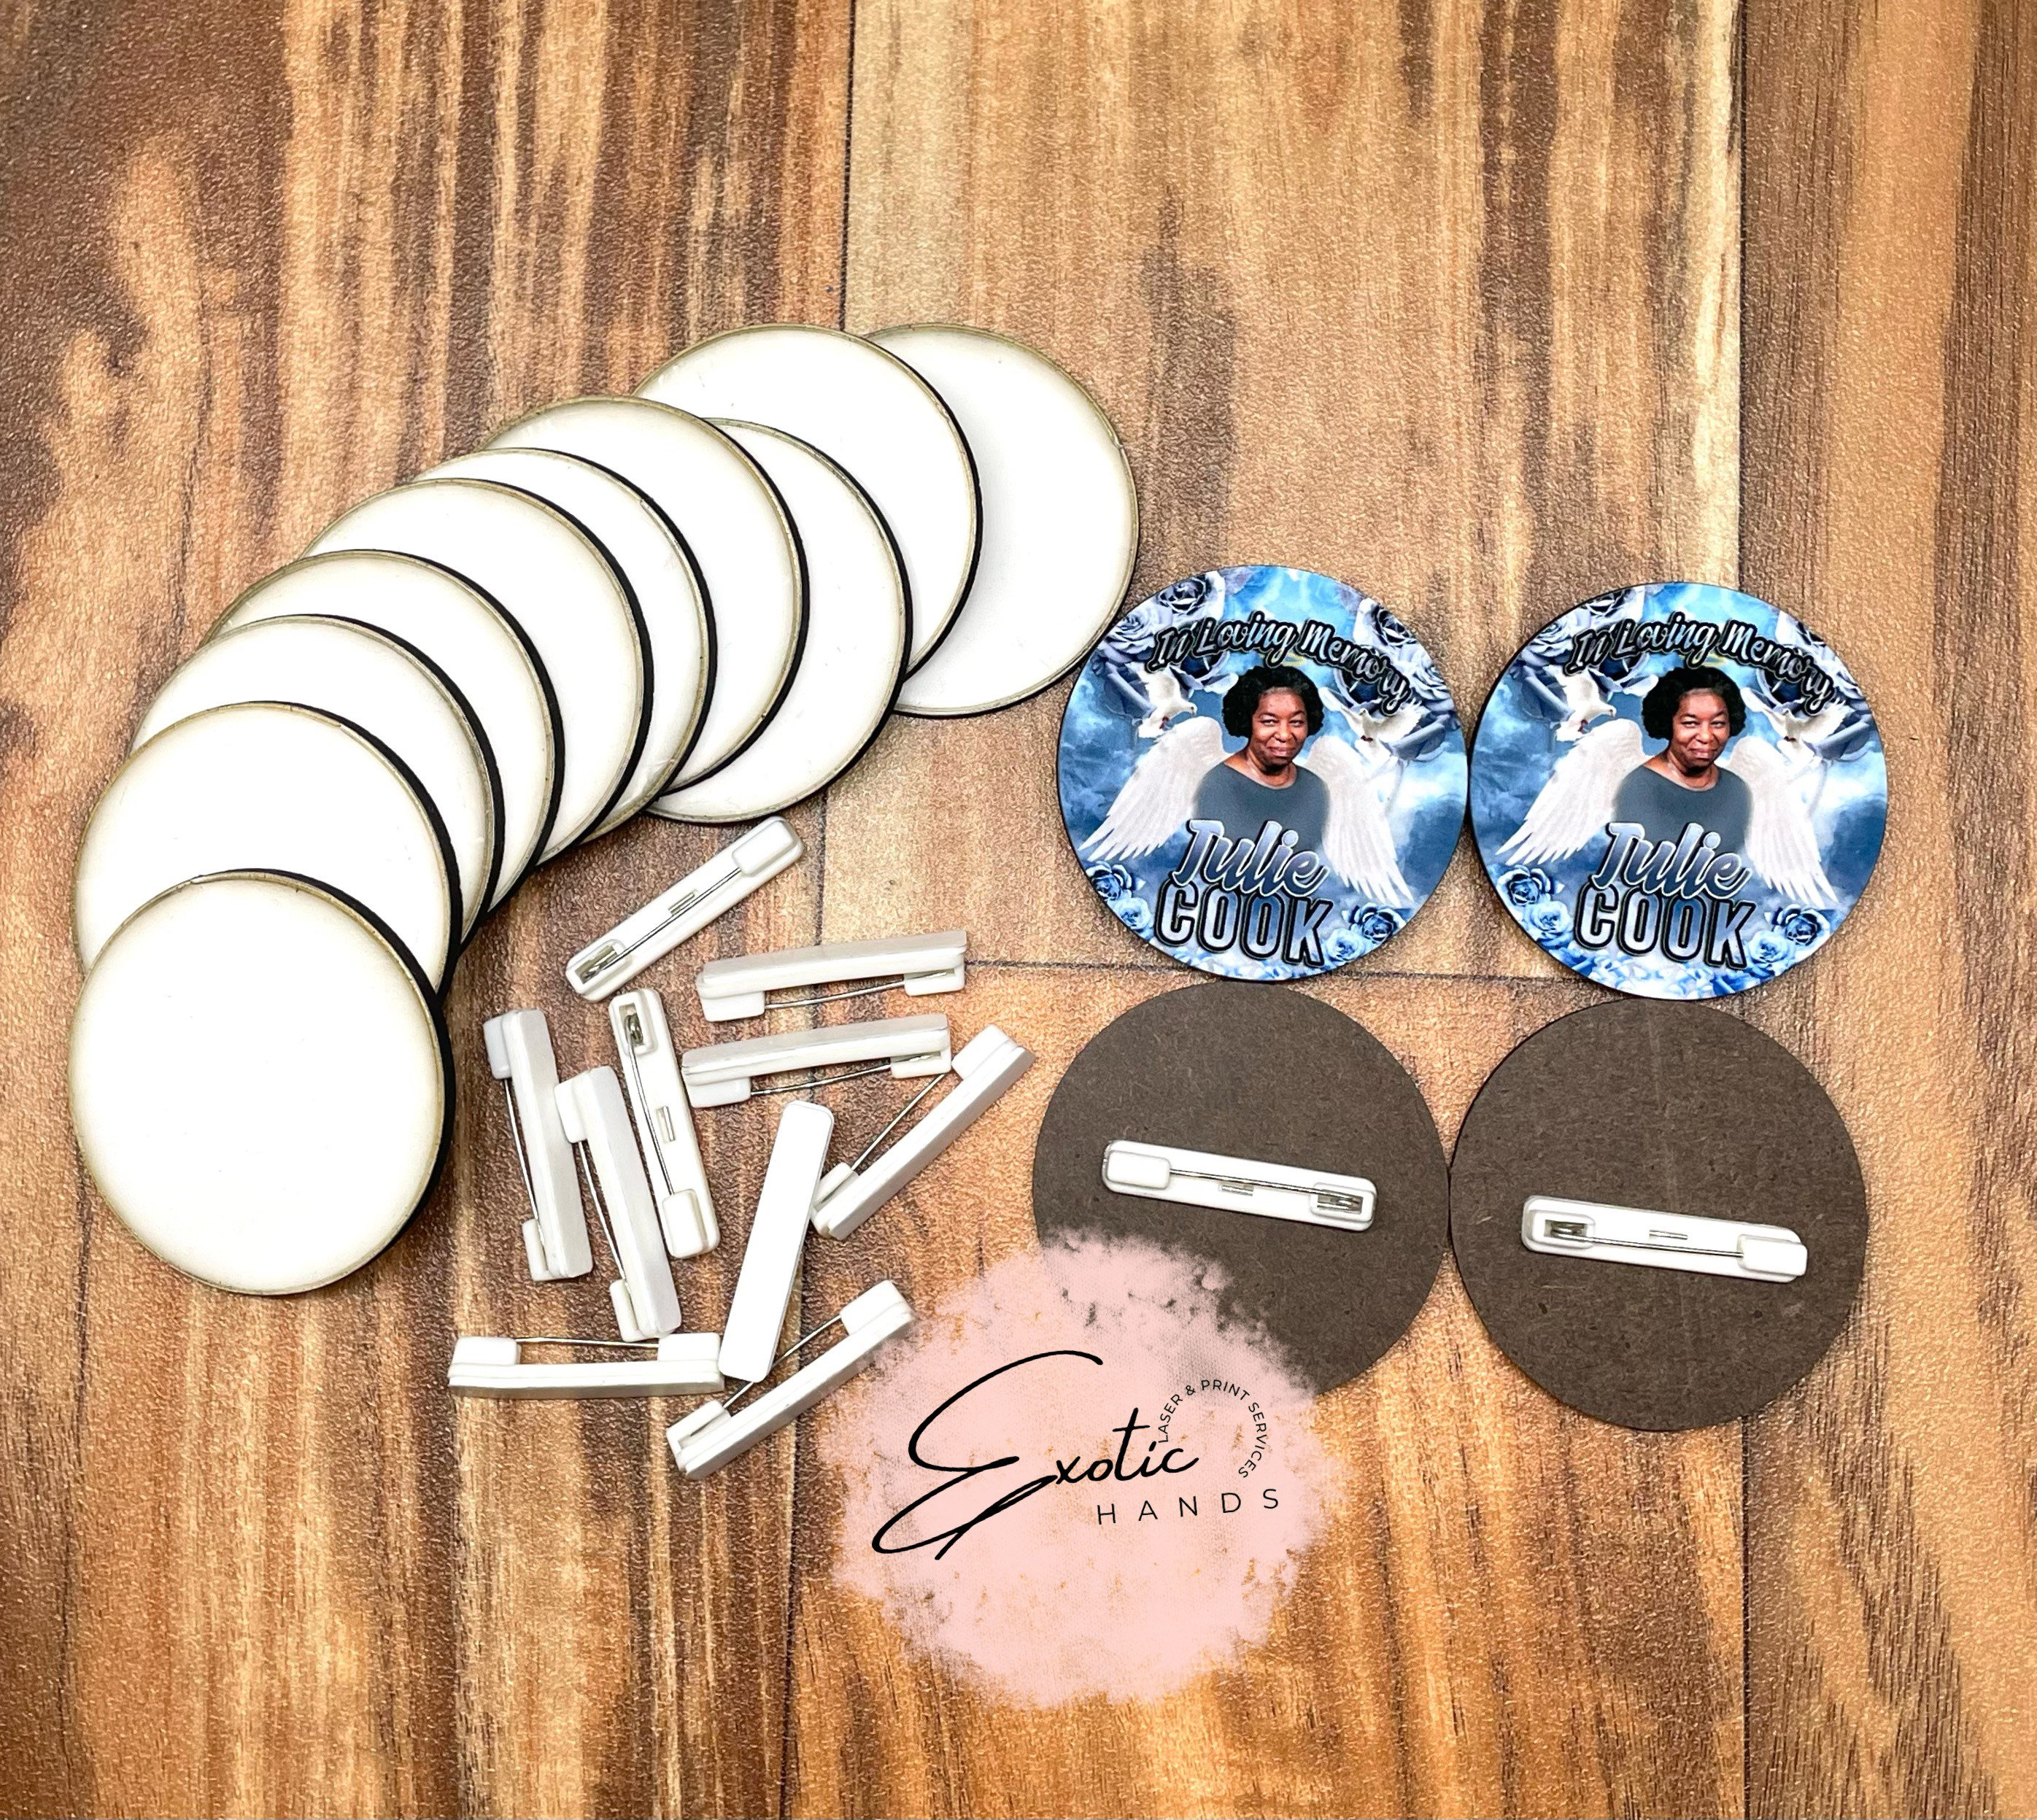 Sublimation Blank Pins DIY Button Badge, Sublimation Silver Blank Base Pins  Aluminum Sheet with Butterfly Pin Backs for DIY Craft Jewelry Making Lapel